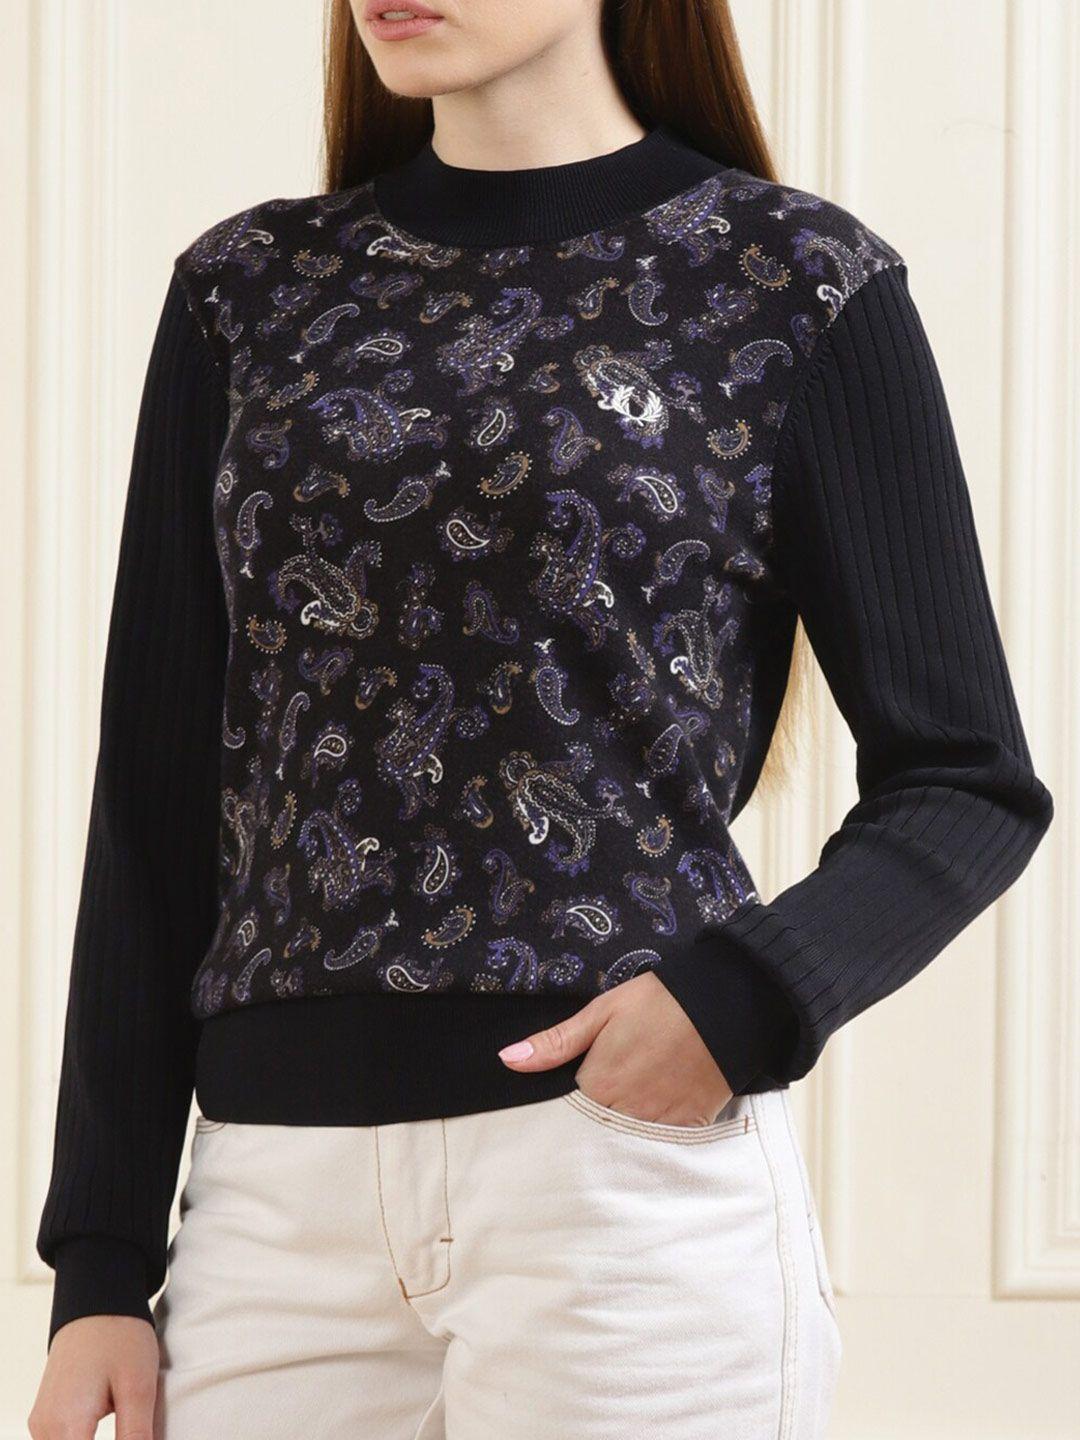 fred perry women black & navy blue floral printed pullover